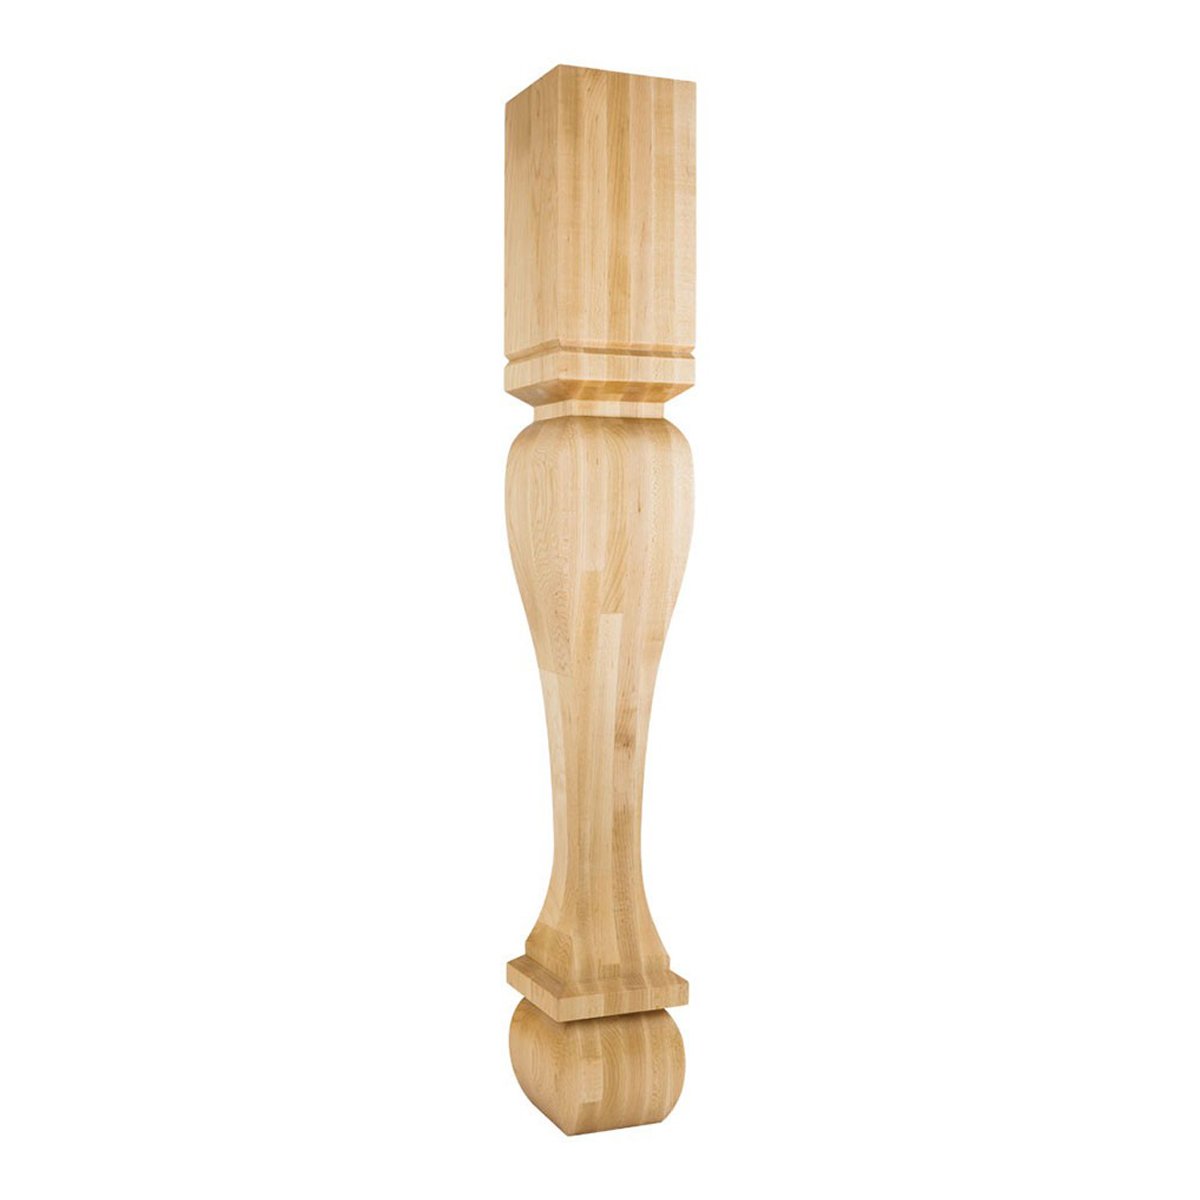 Hardware Resources 6" x 6" x 42" Square Alder Post / Table Leg with Foot-DirectSinks